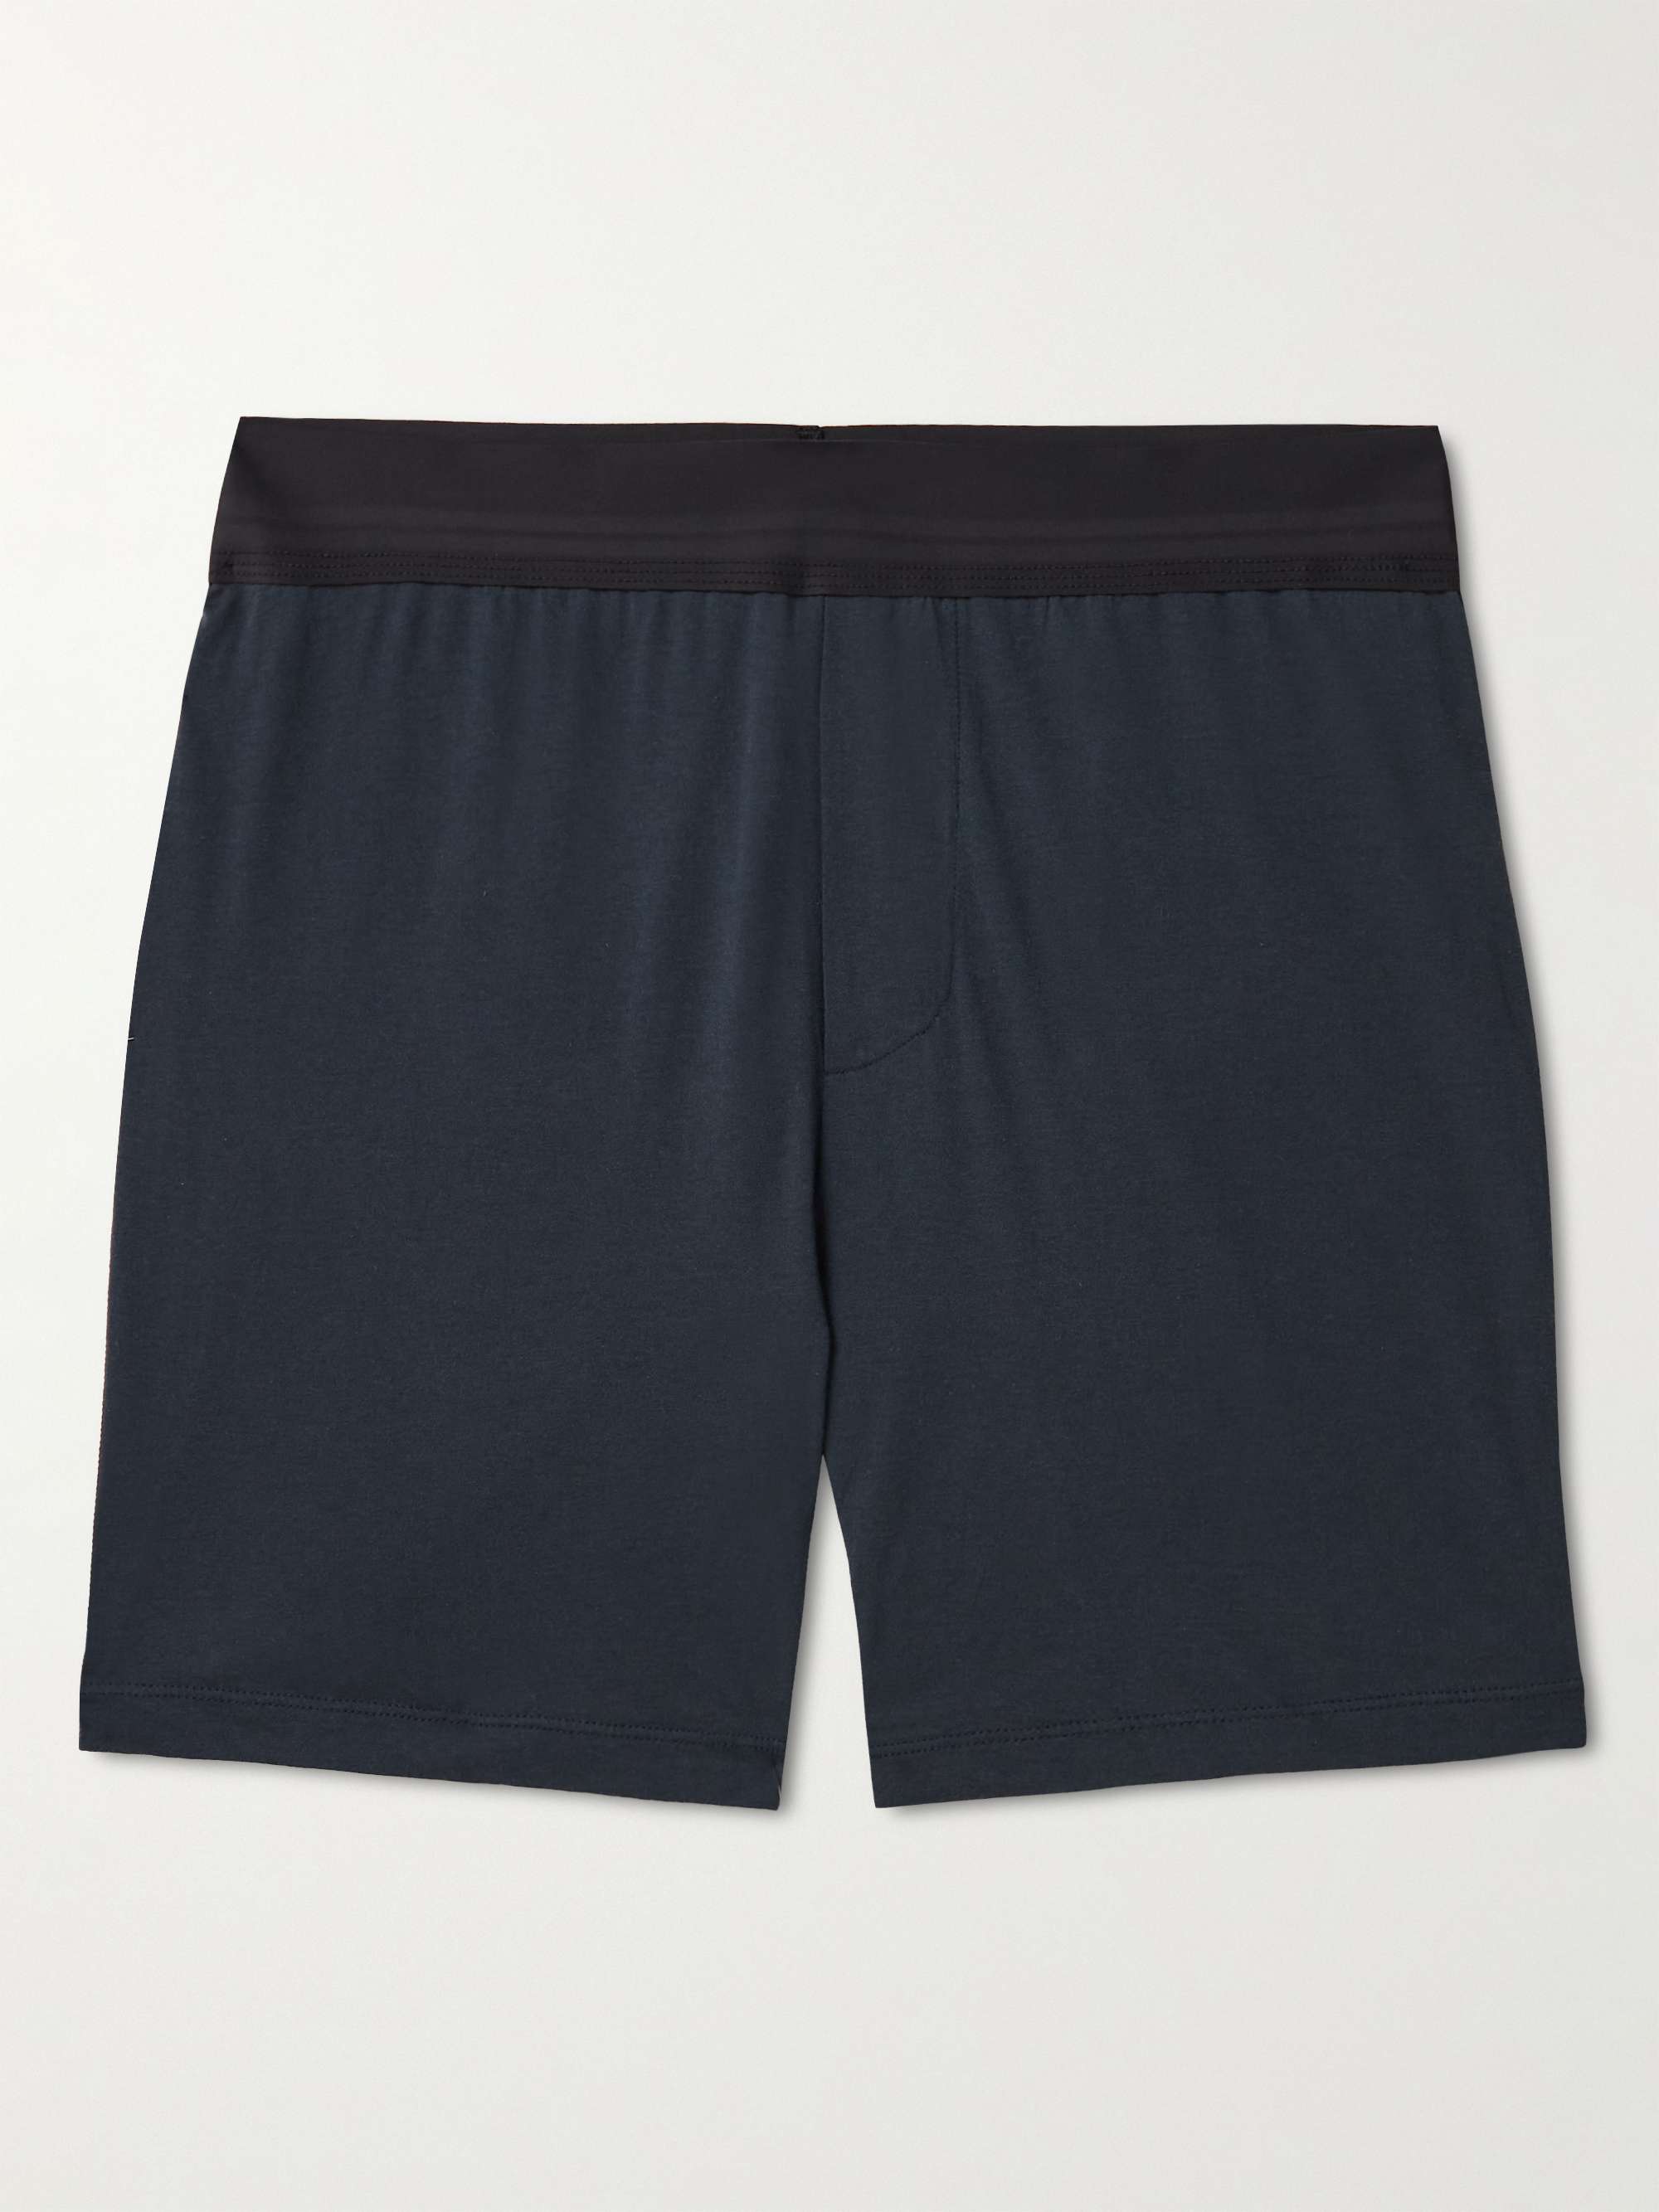 JAMES PERSE Luxe Lotus Cotton-Jersey Boxer Shorts